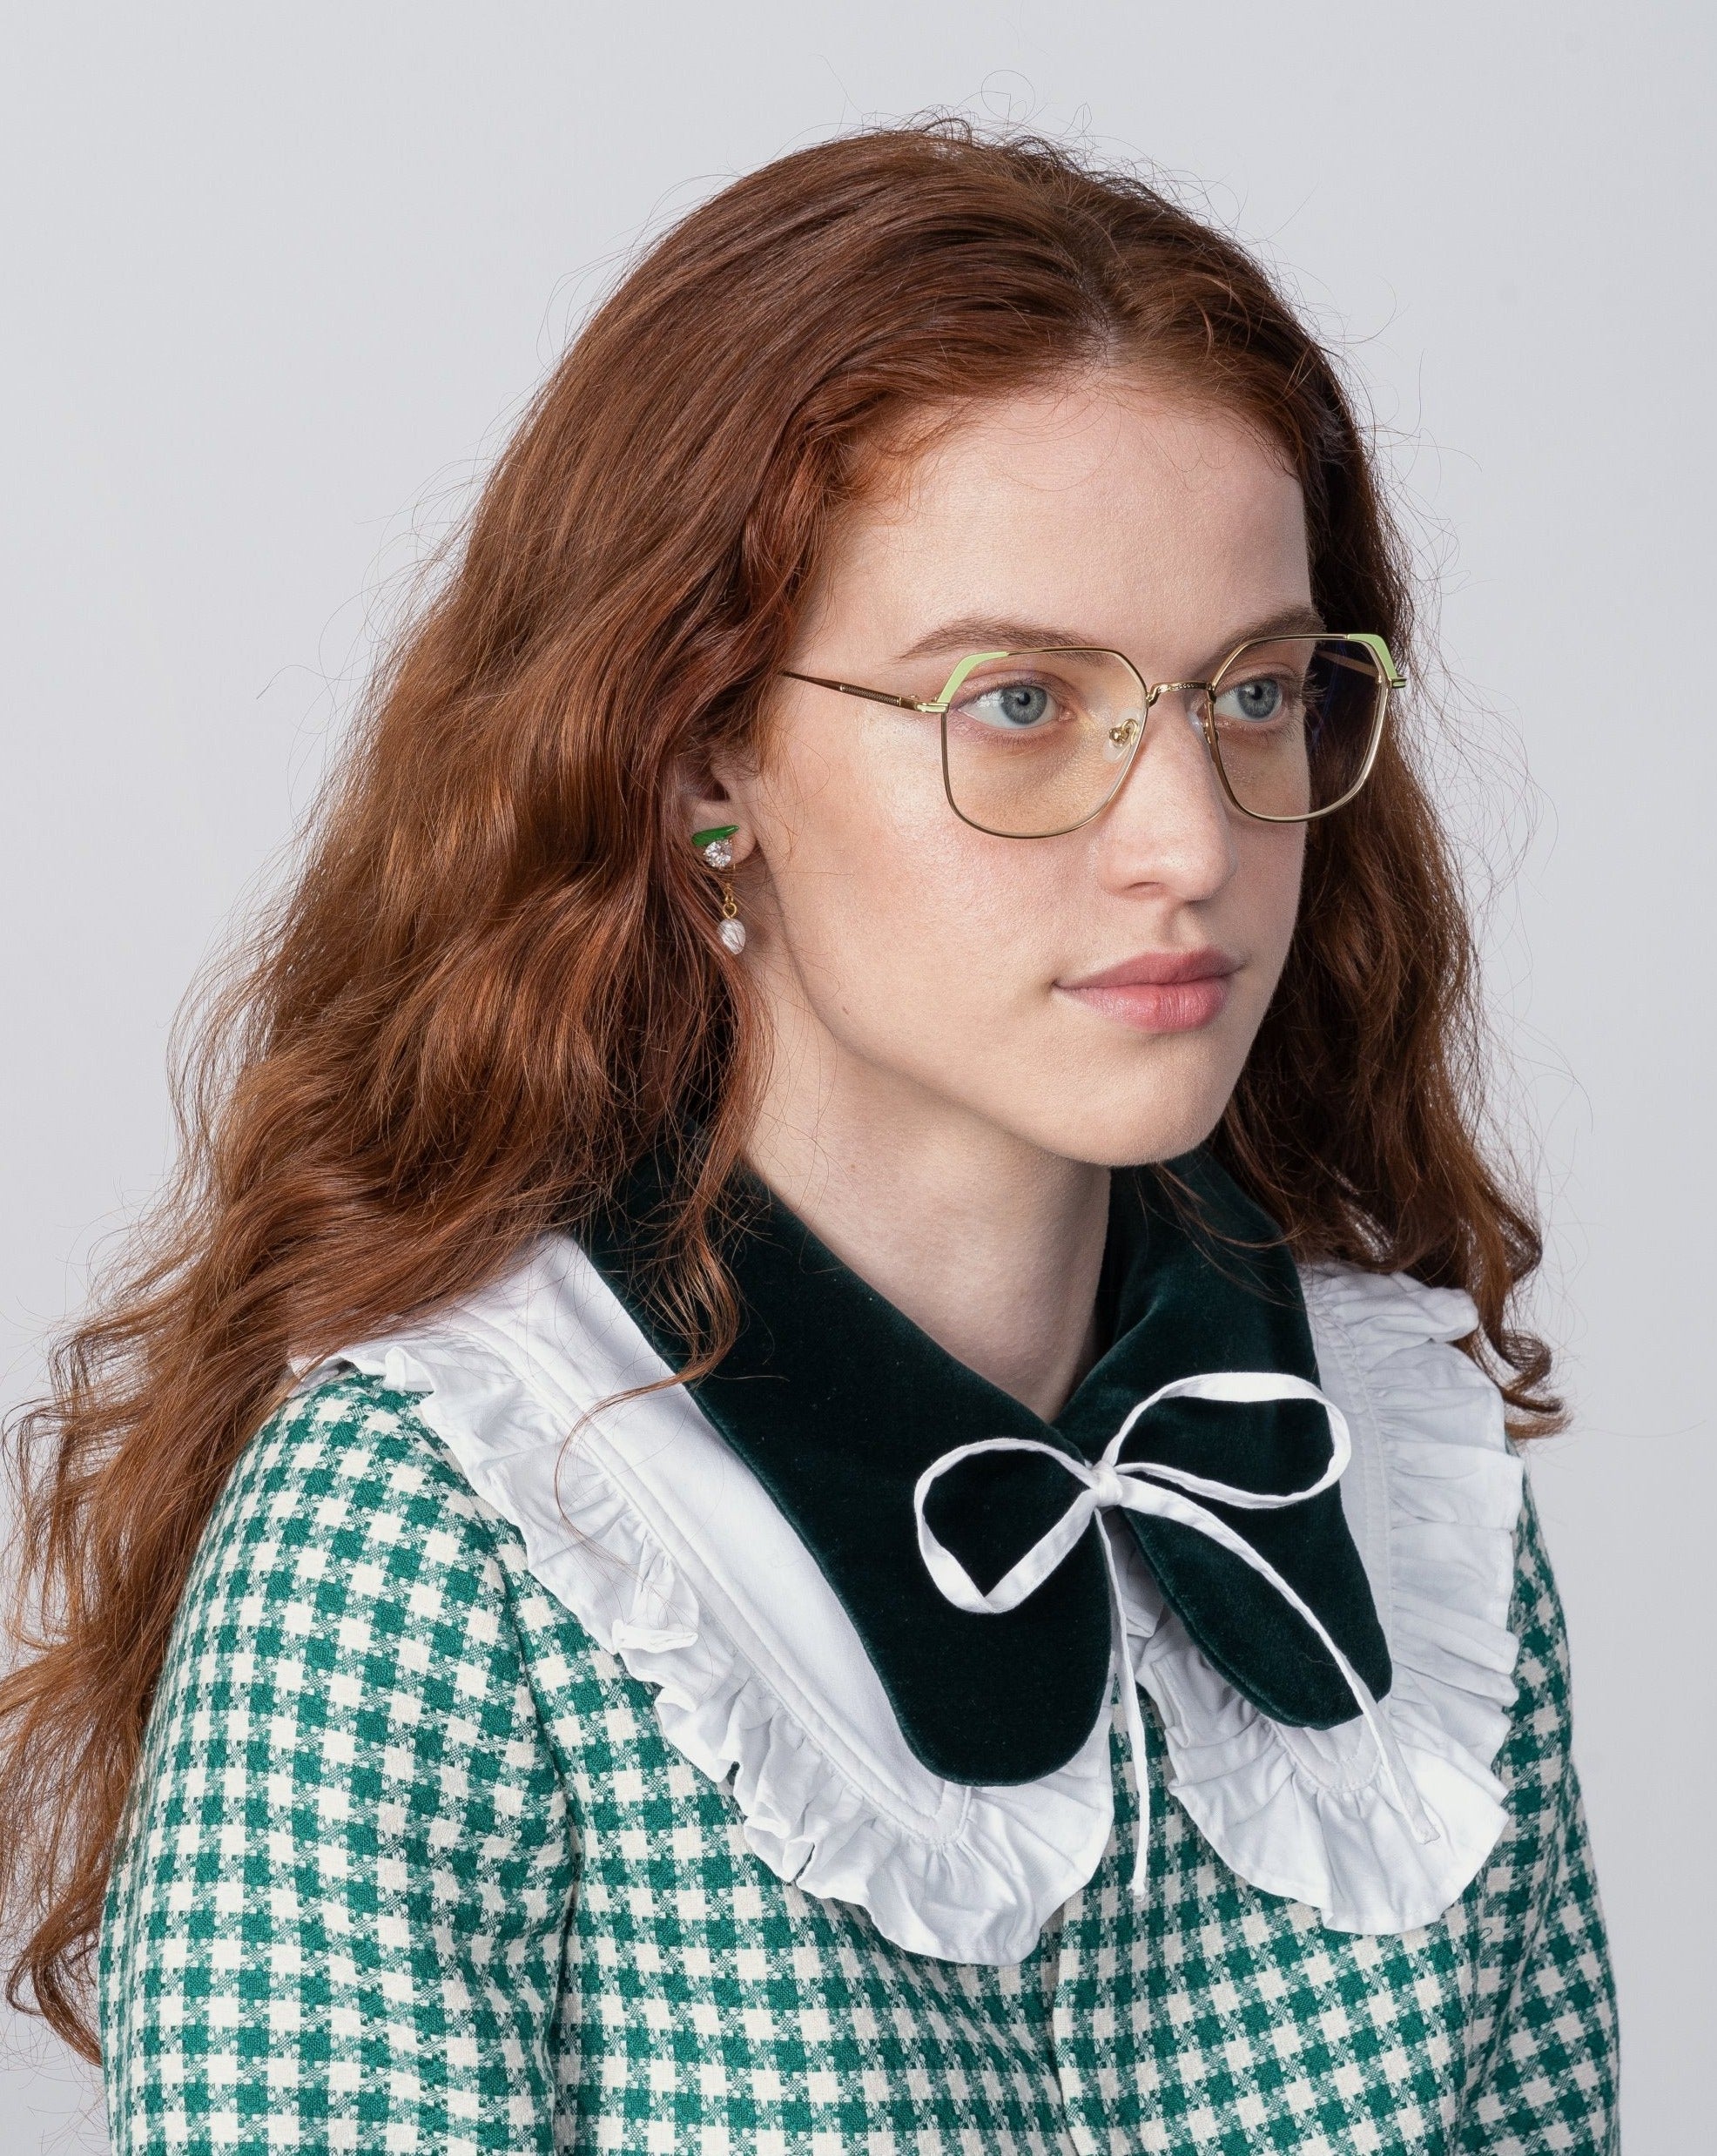 A person with long, wavy, red hair and wearing glasses with prescription lenses from For Art&#39;s Sake® looks to the side. They are dressed in a green and white checkered outfit with a large black collar adorned with a white ruffle and bow. The background is plain and light-colored.